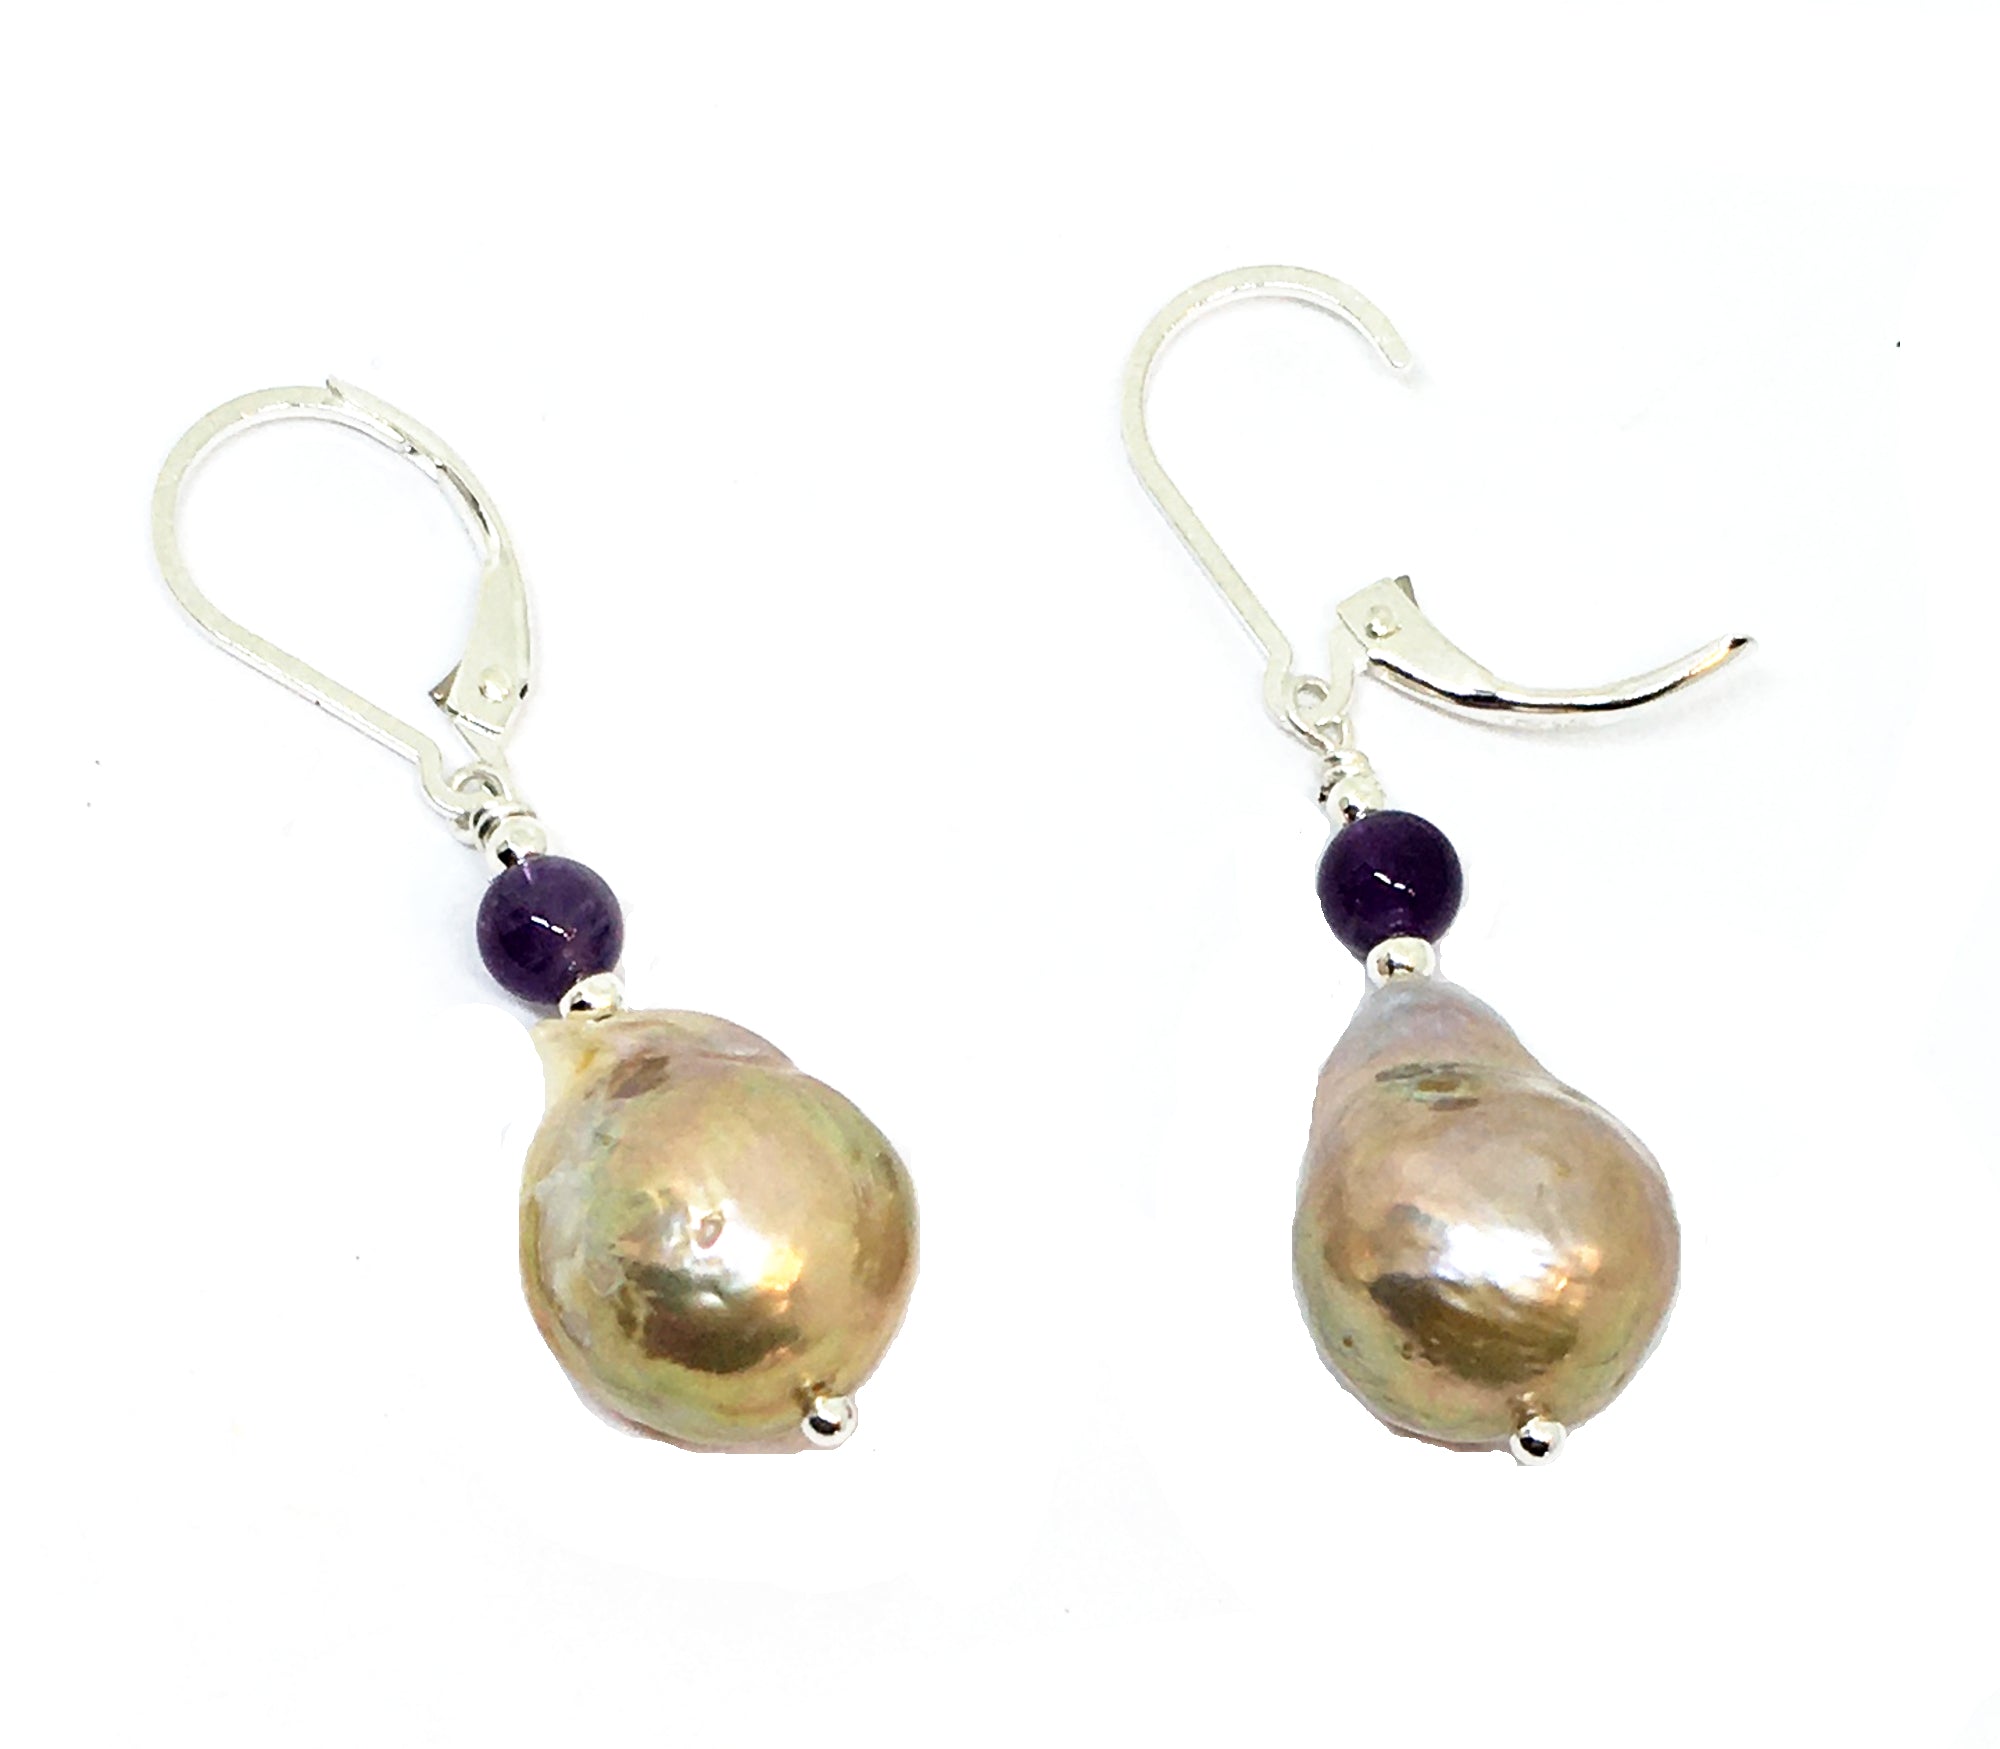 Fireball Pearl and Amethyst Drop Earrings with Leverback Earwires